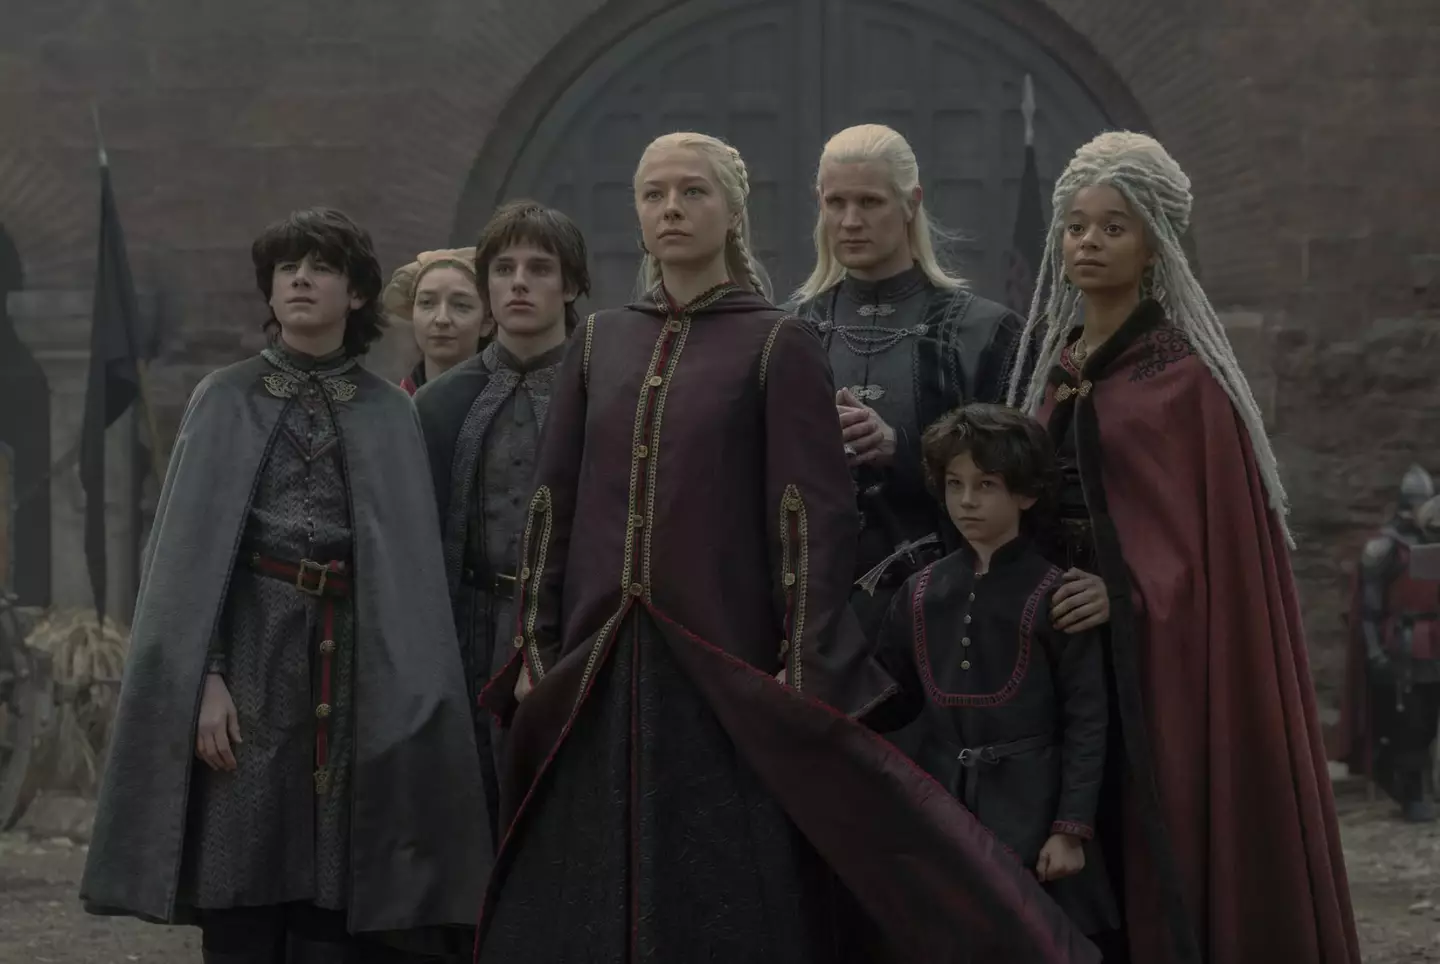 House of the Dragon follows the Targaryen dynasty 100 years before the main series.